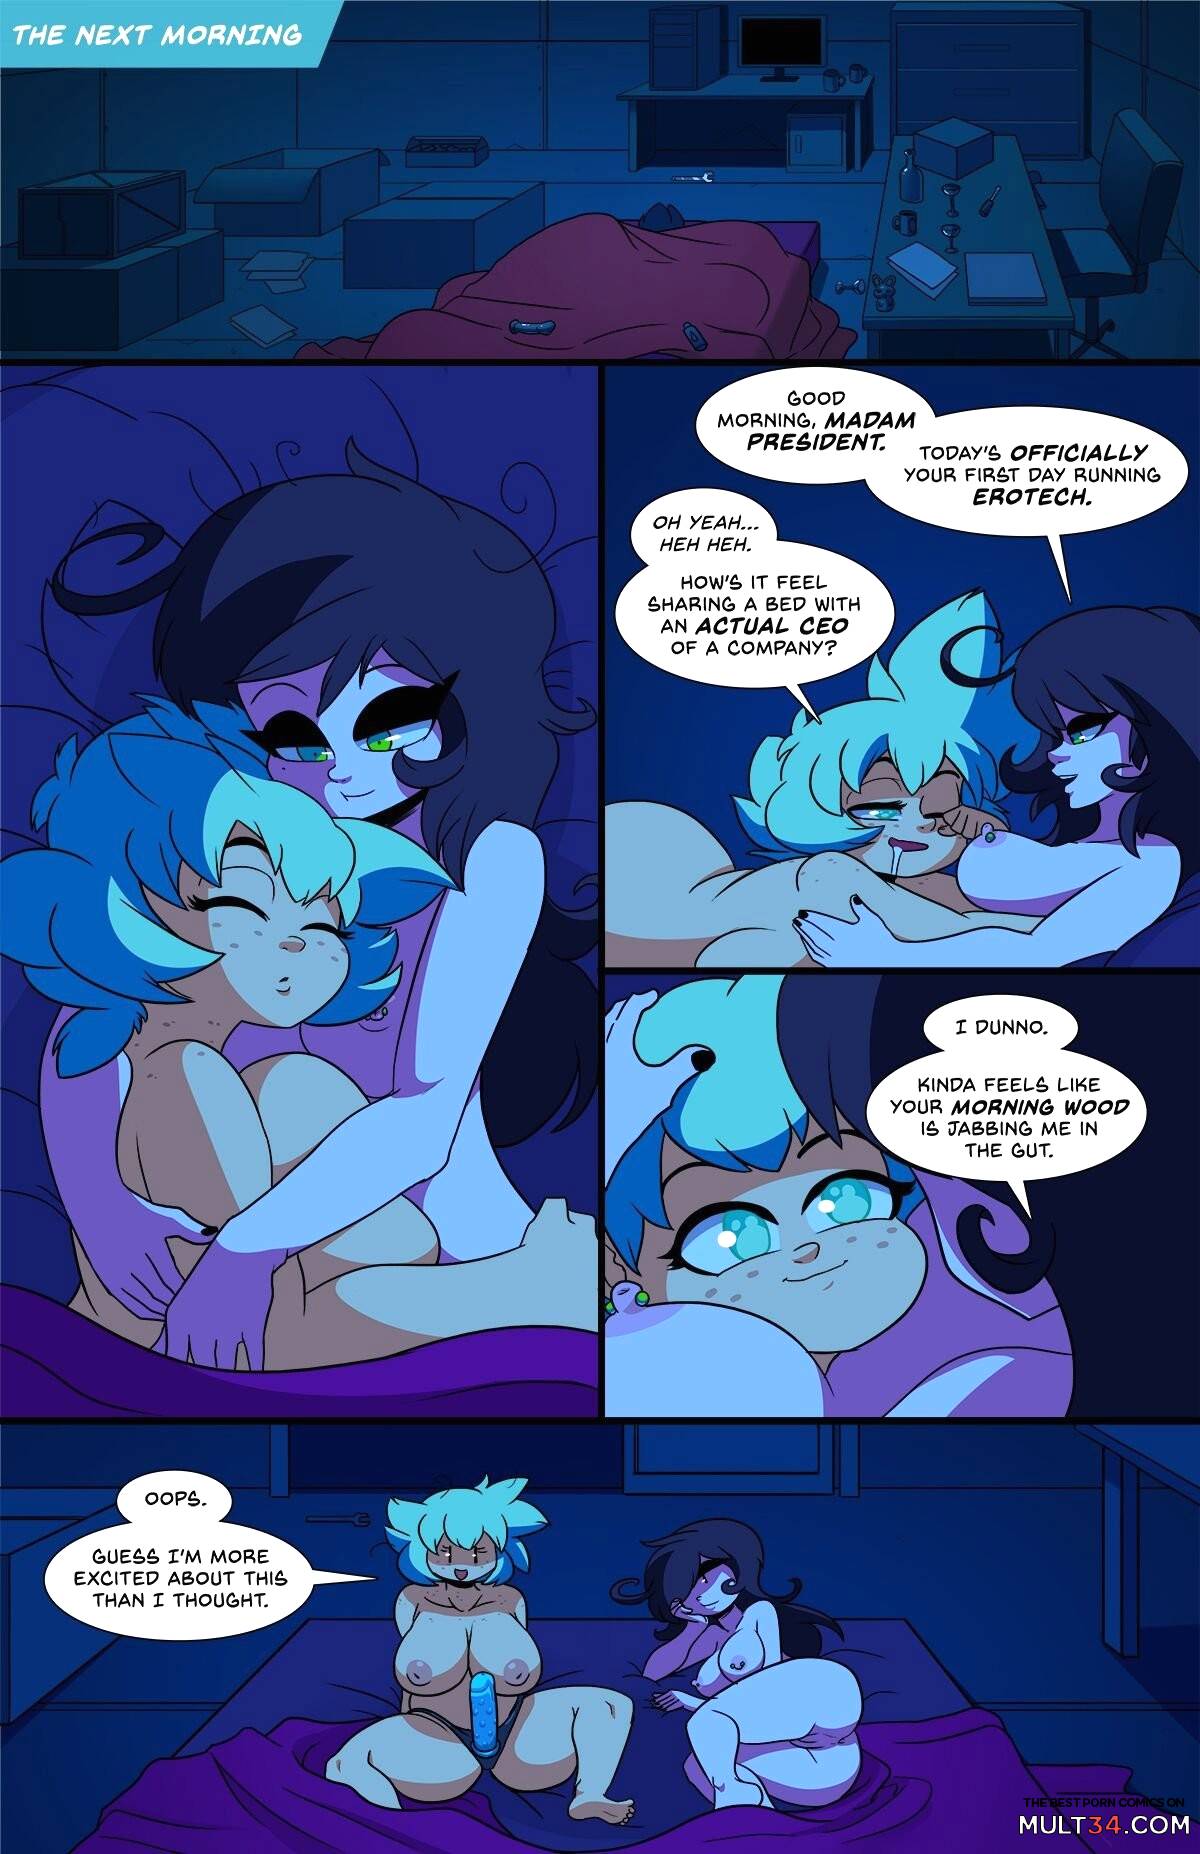 Erotech - Chapter 2 page 2